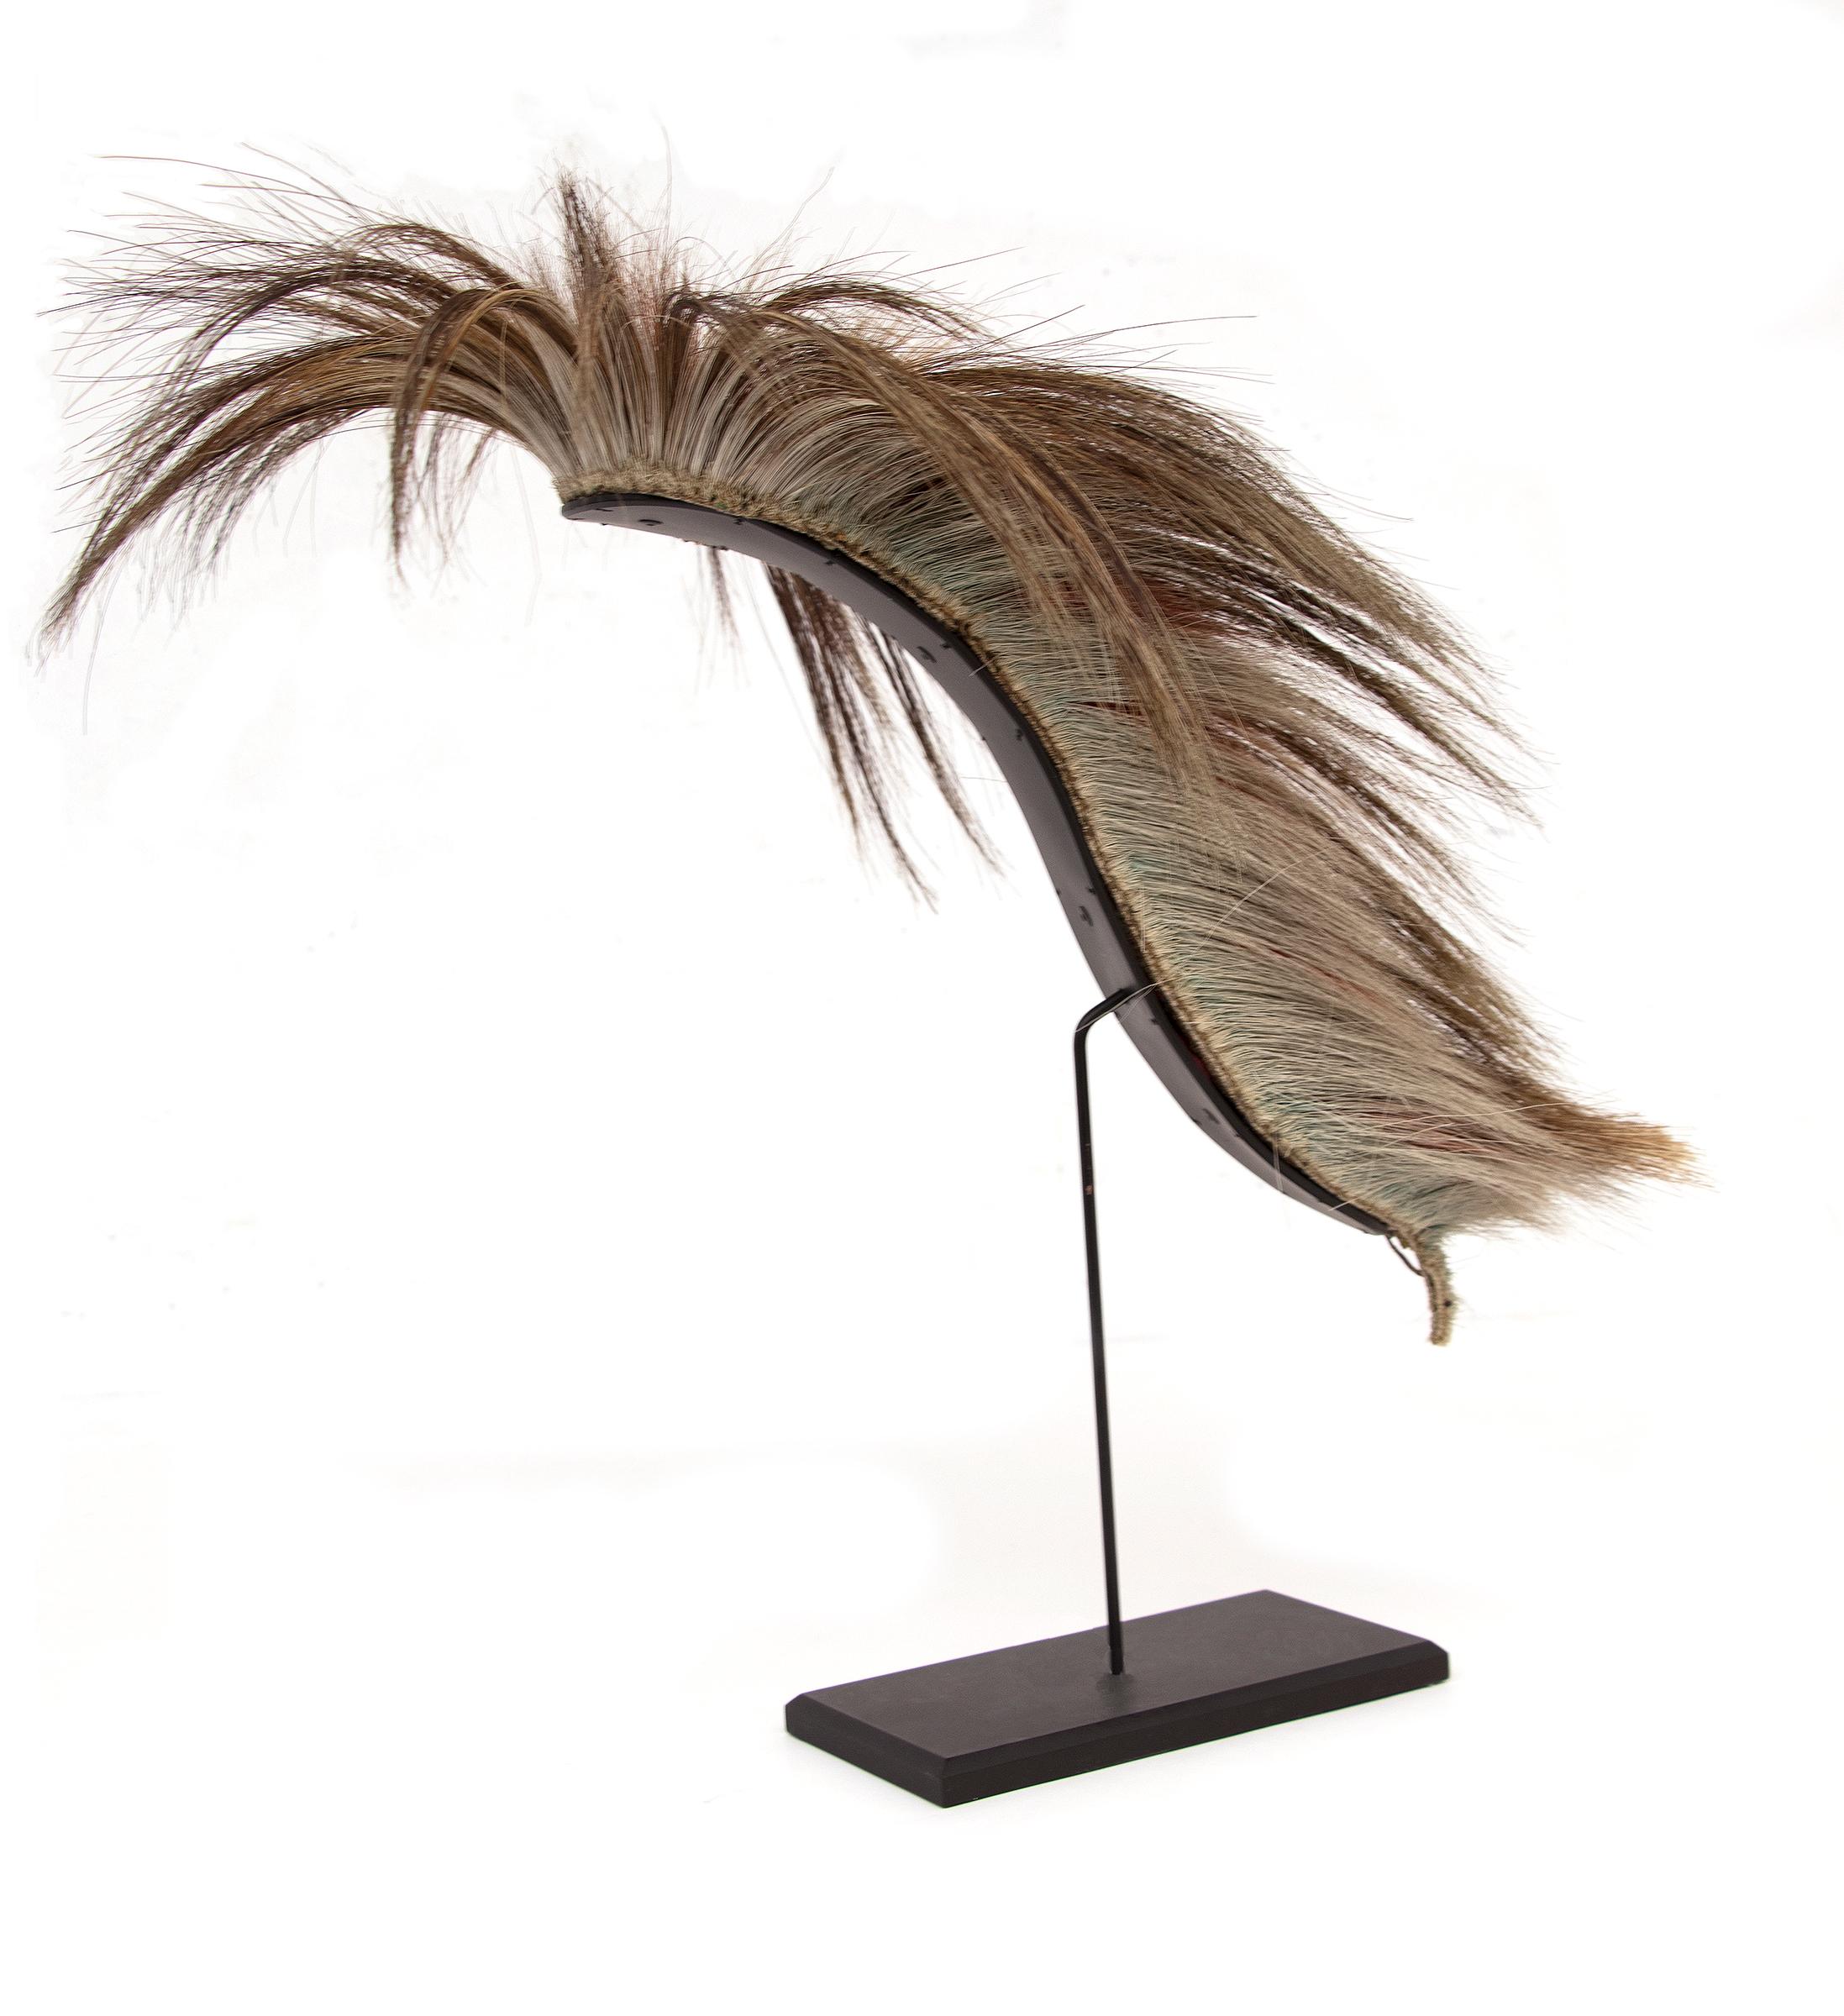 Antique 19th century Native American (Plains Indian) roach headdress made with dyed deer hair and porcupine guard hair on a u-shaped braided cloth with leather cords. 

Custom display stand is included.  Dimensions (as shown on the stand) measure 18